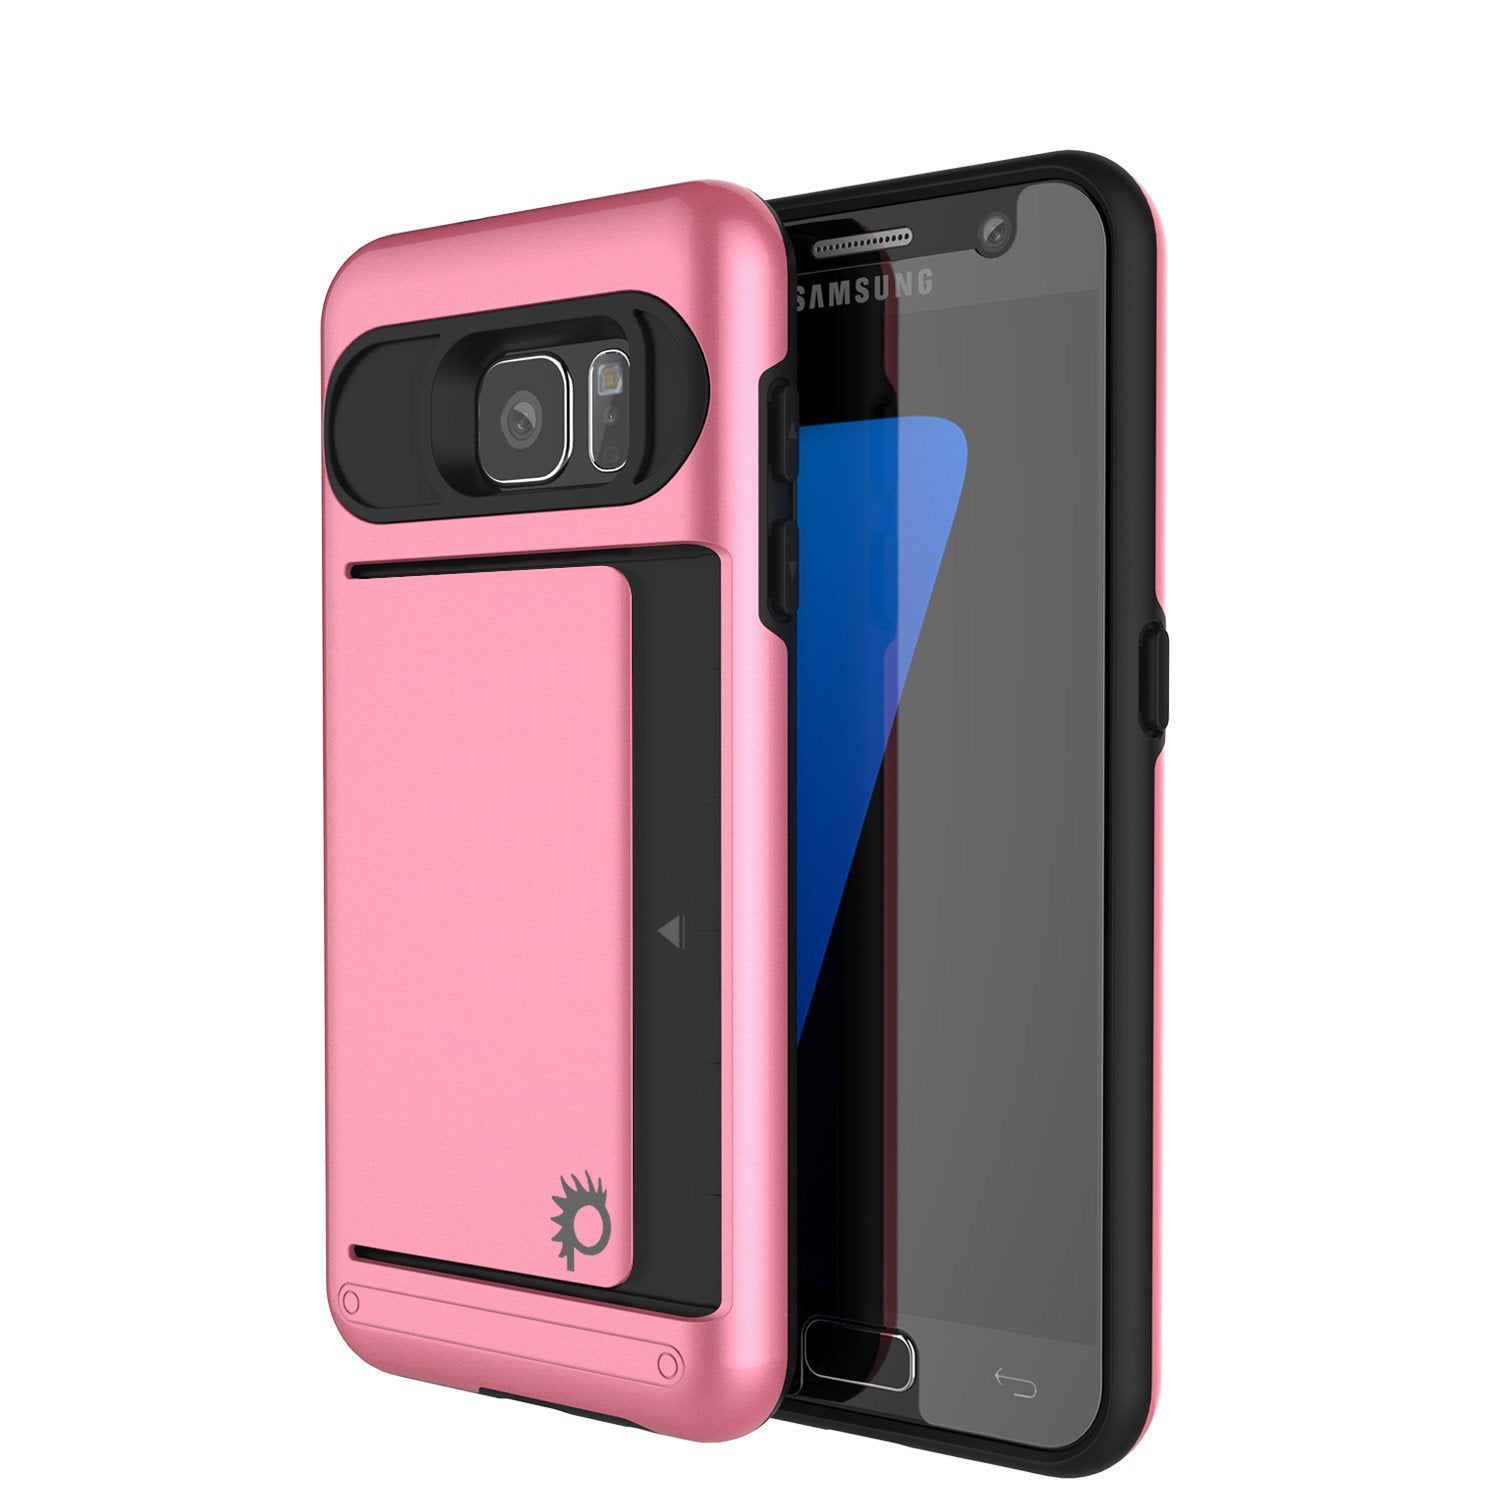 Galaxy S7 EDGE Case PunkCase CLUTCH Pink Series Slim Armor Soft Cover Case w/ Screen Protector